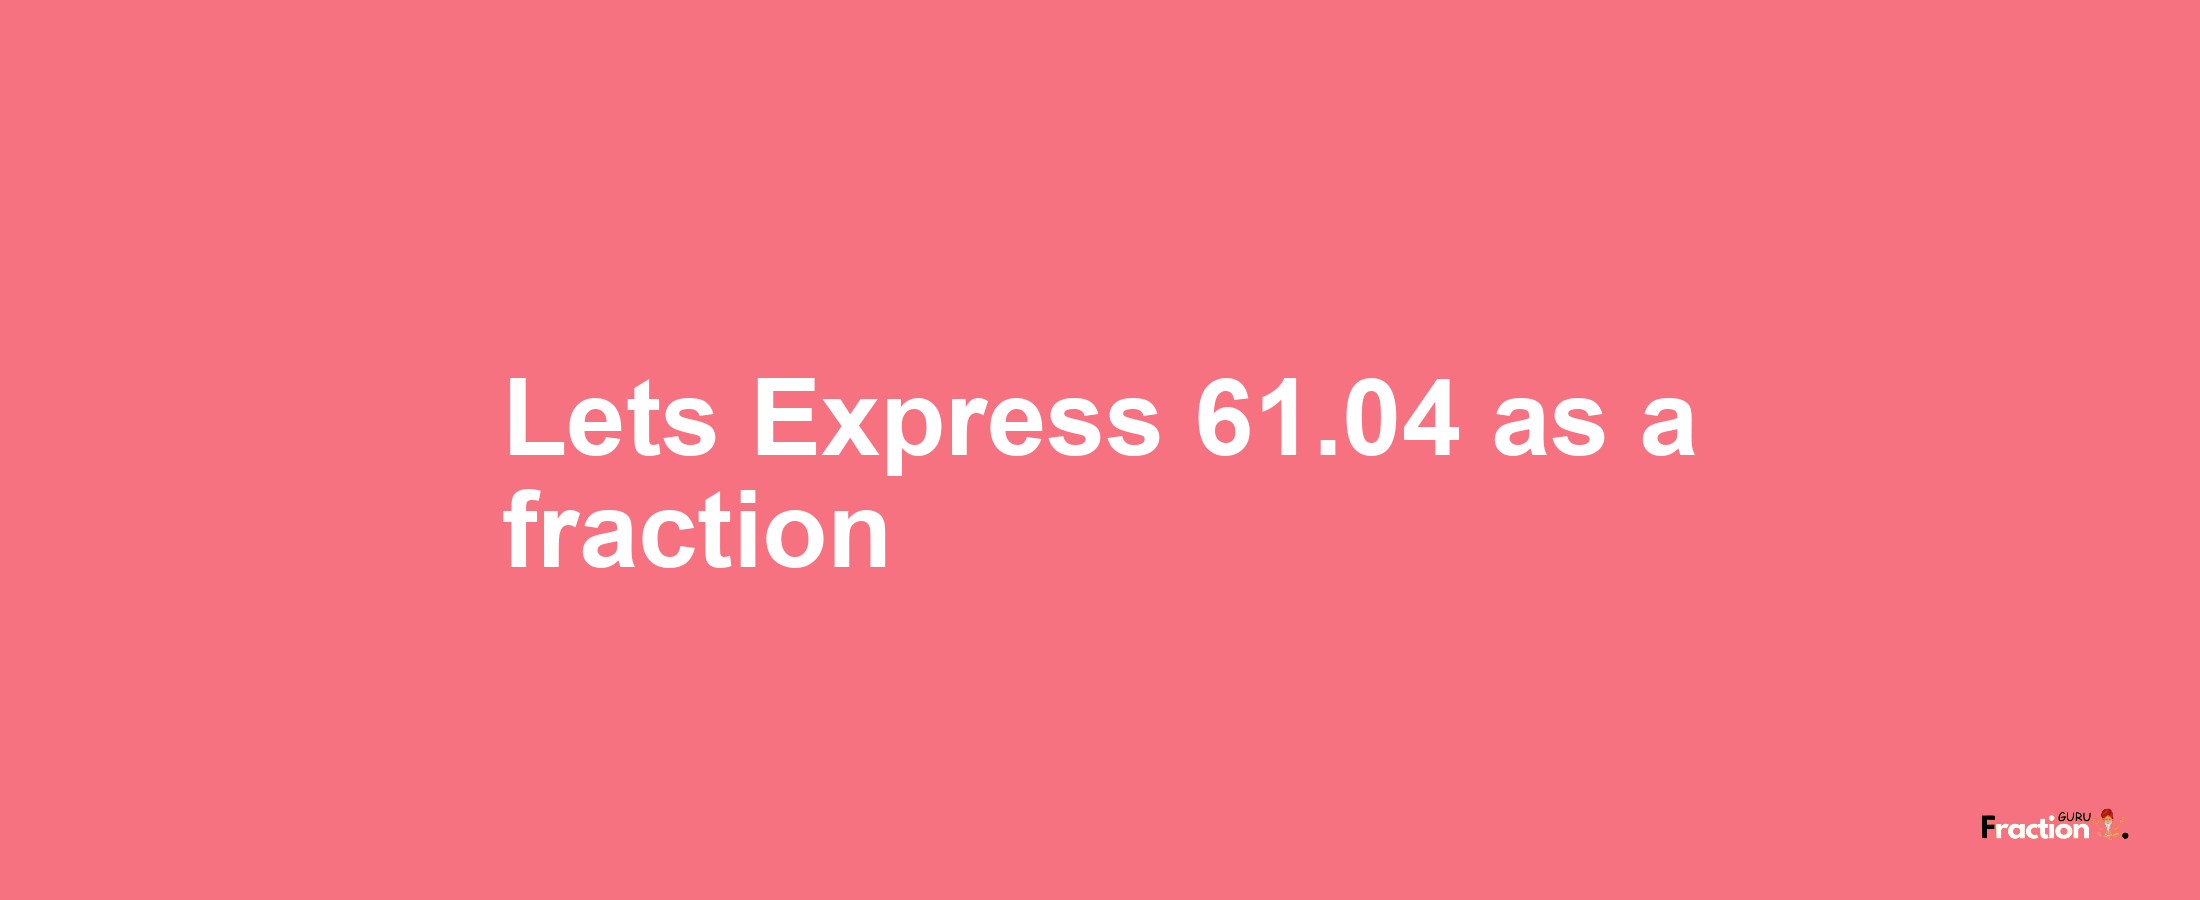 Lets Express 61.04 as afraction